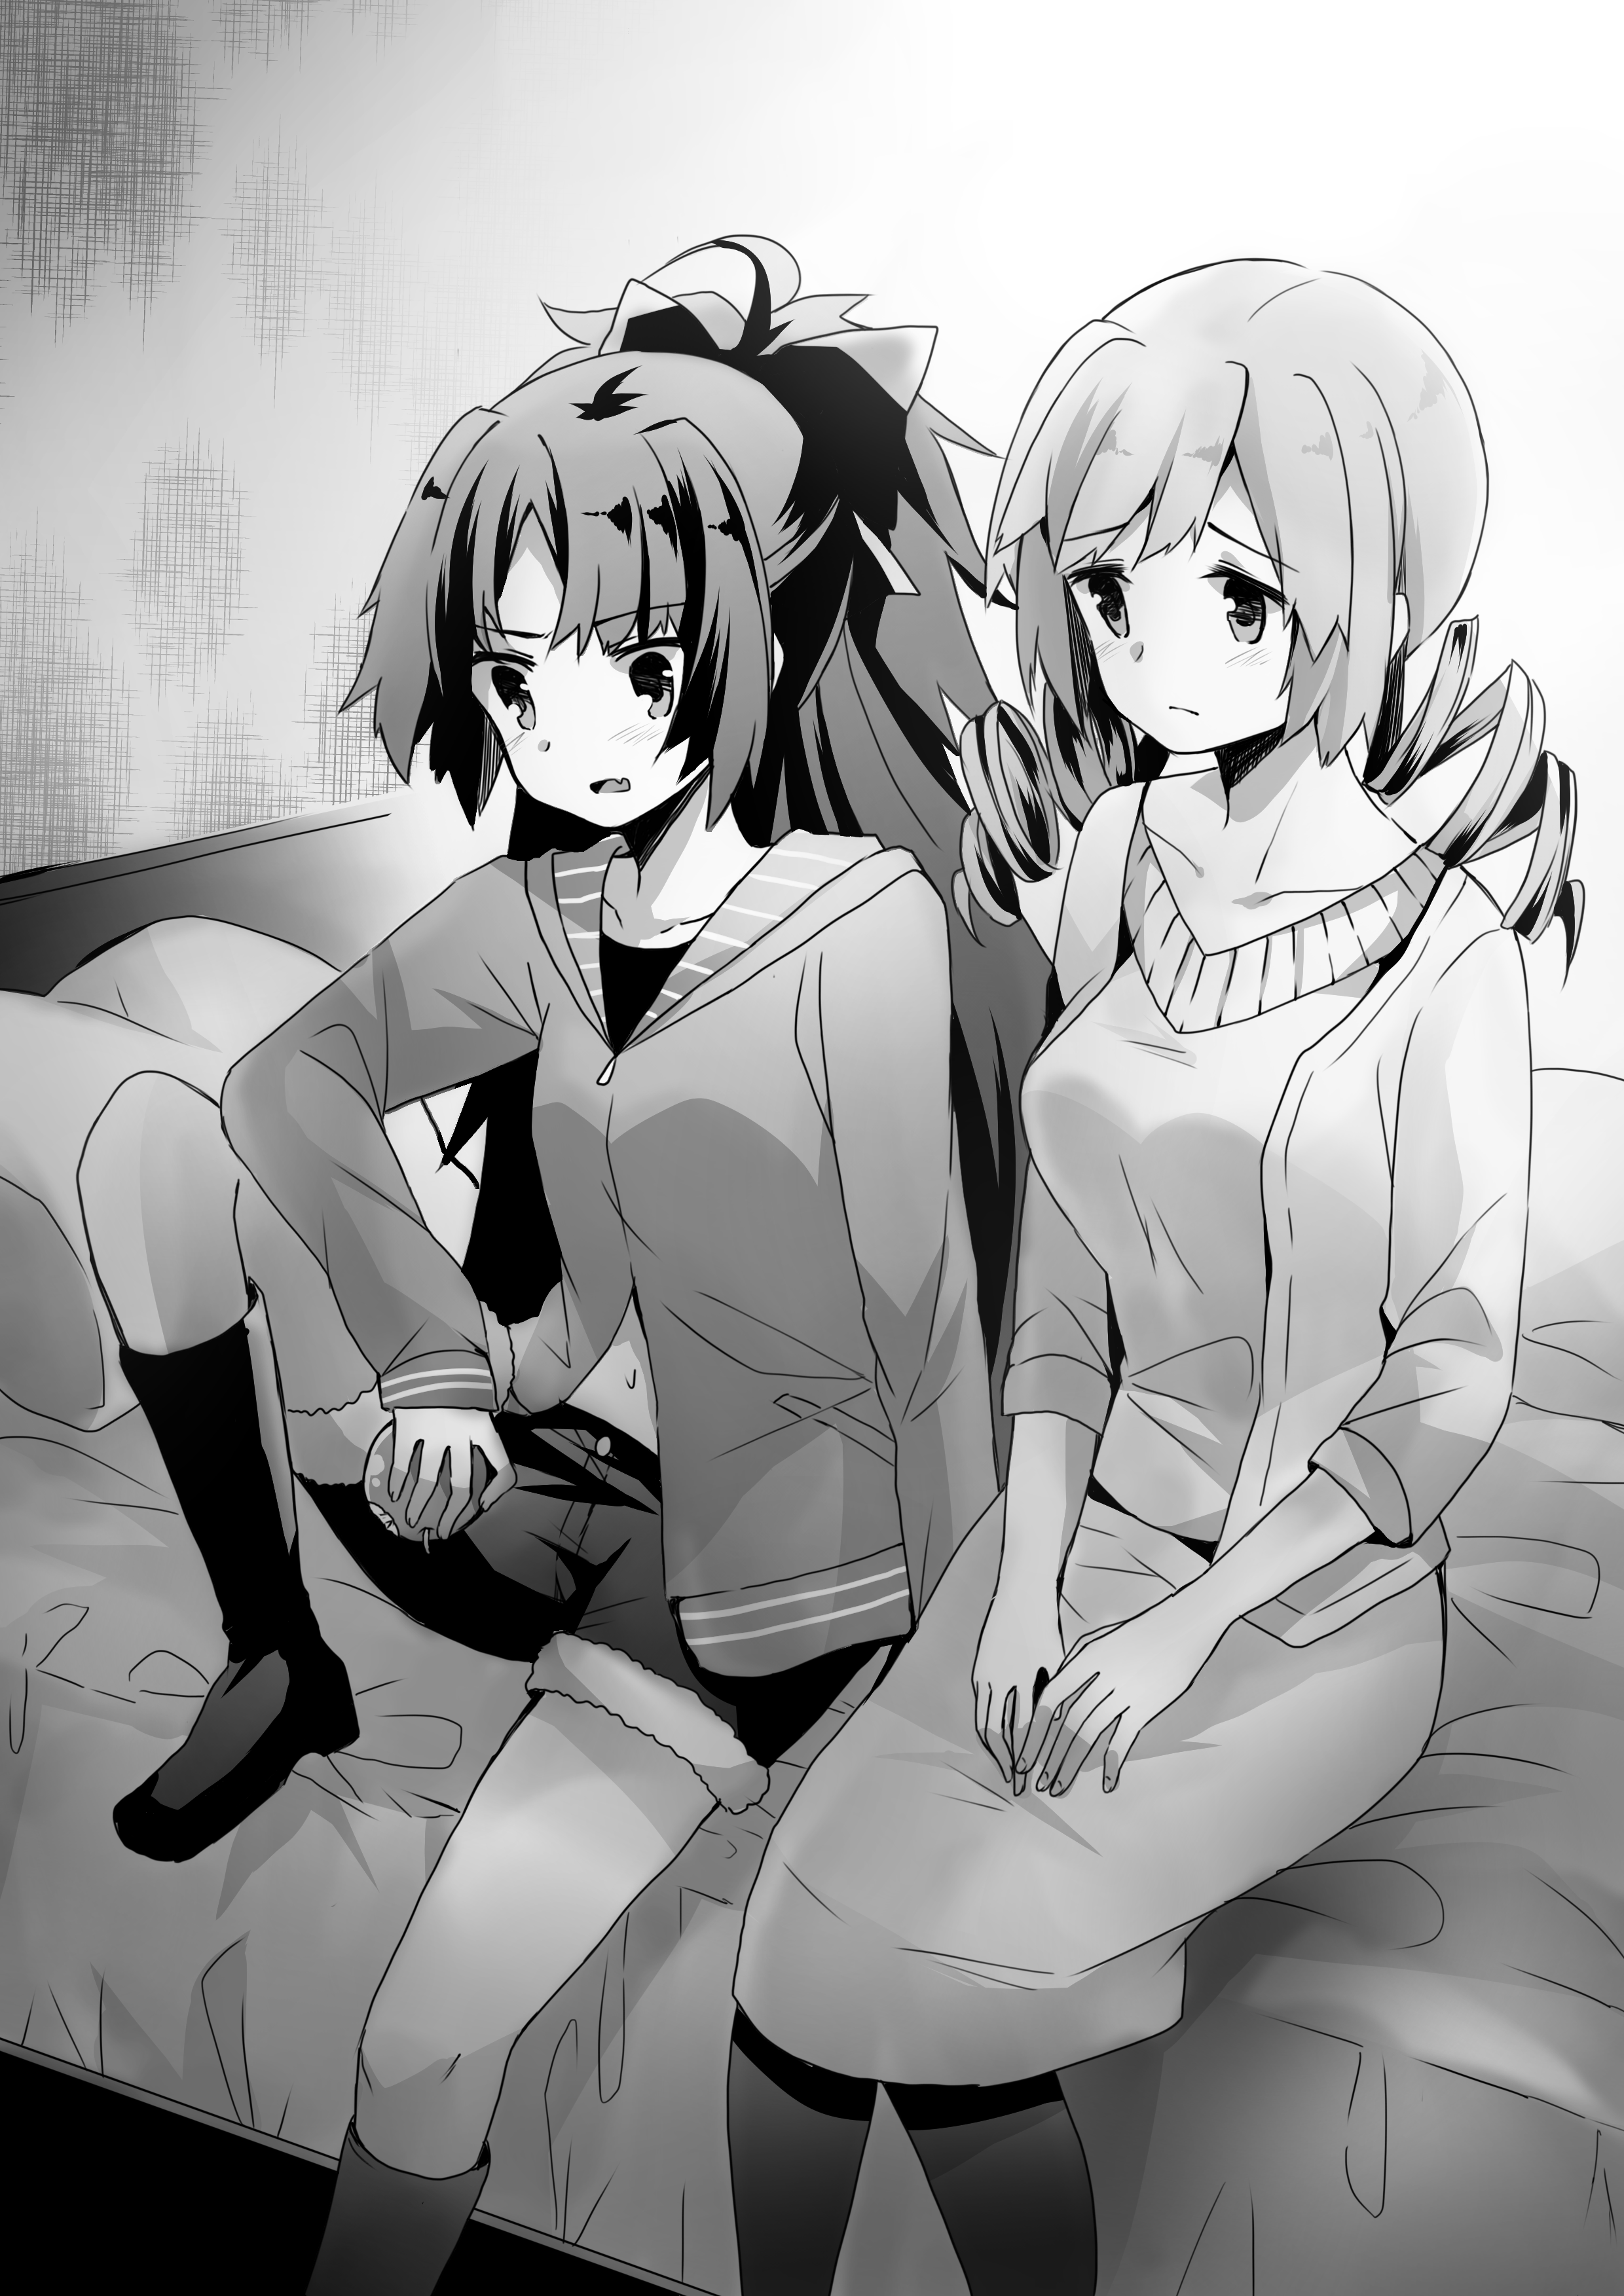 Kyouko sitting next to Mami inside Cult compound (by ChrisTy)